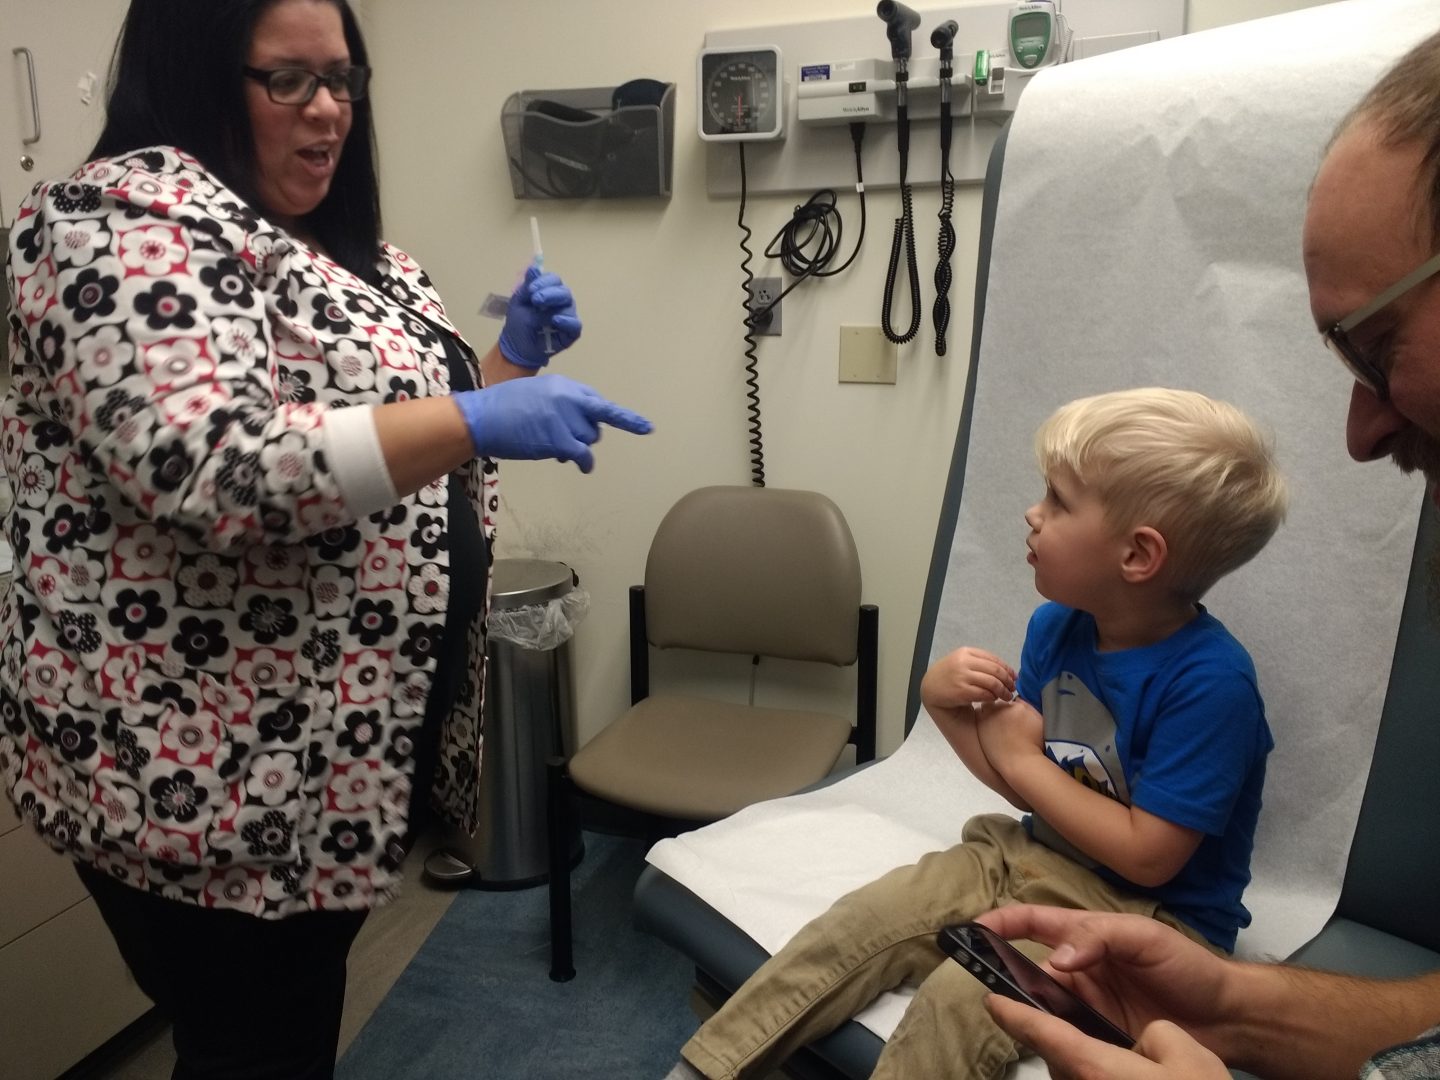 Shark Snider, age 3, waits for a flu shot at the Squirrel Hill Health Center in Pittsburgh.